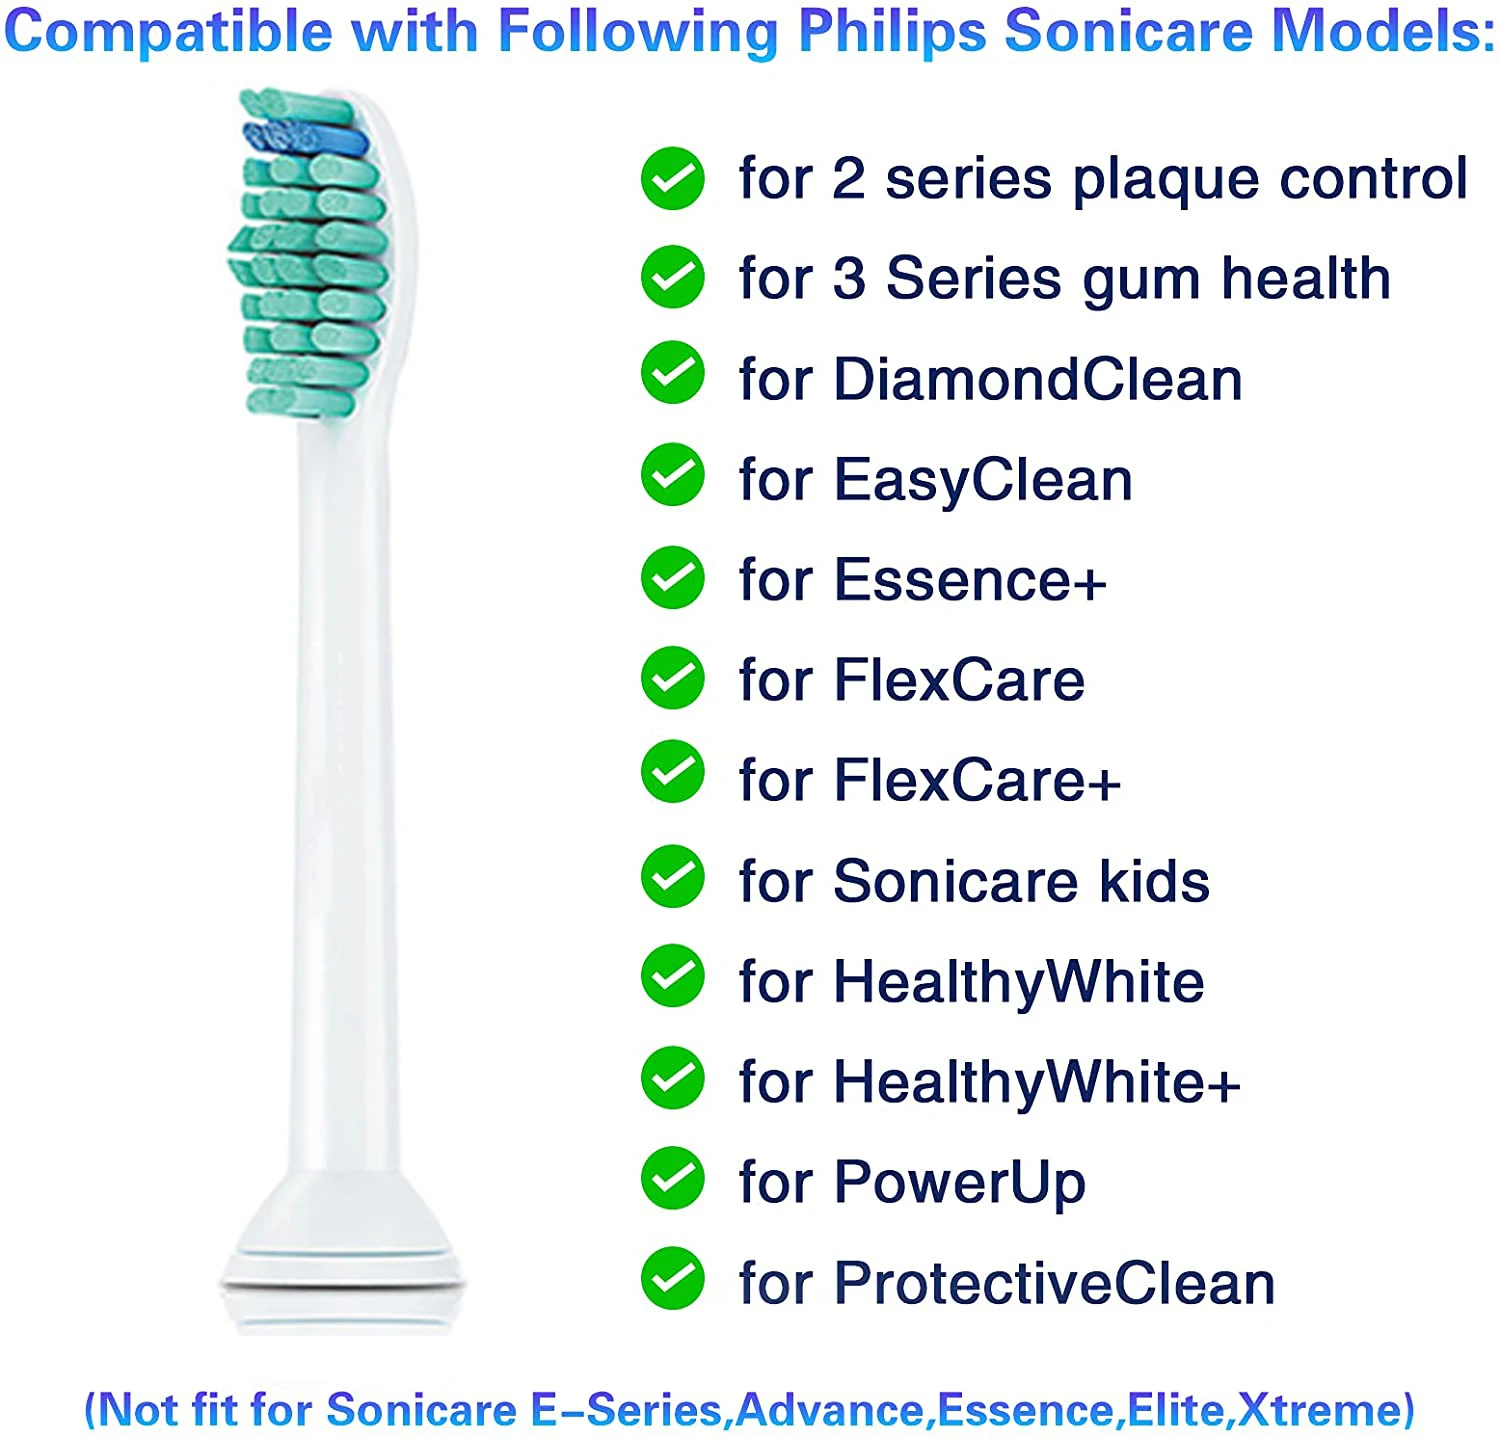 20pcs Replacement for Philips Toothbrush Heads for Sonicare Flexcare Diamond Clean Healthy White EasyClean PowerUp Elite+ enlarge